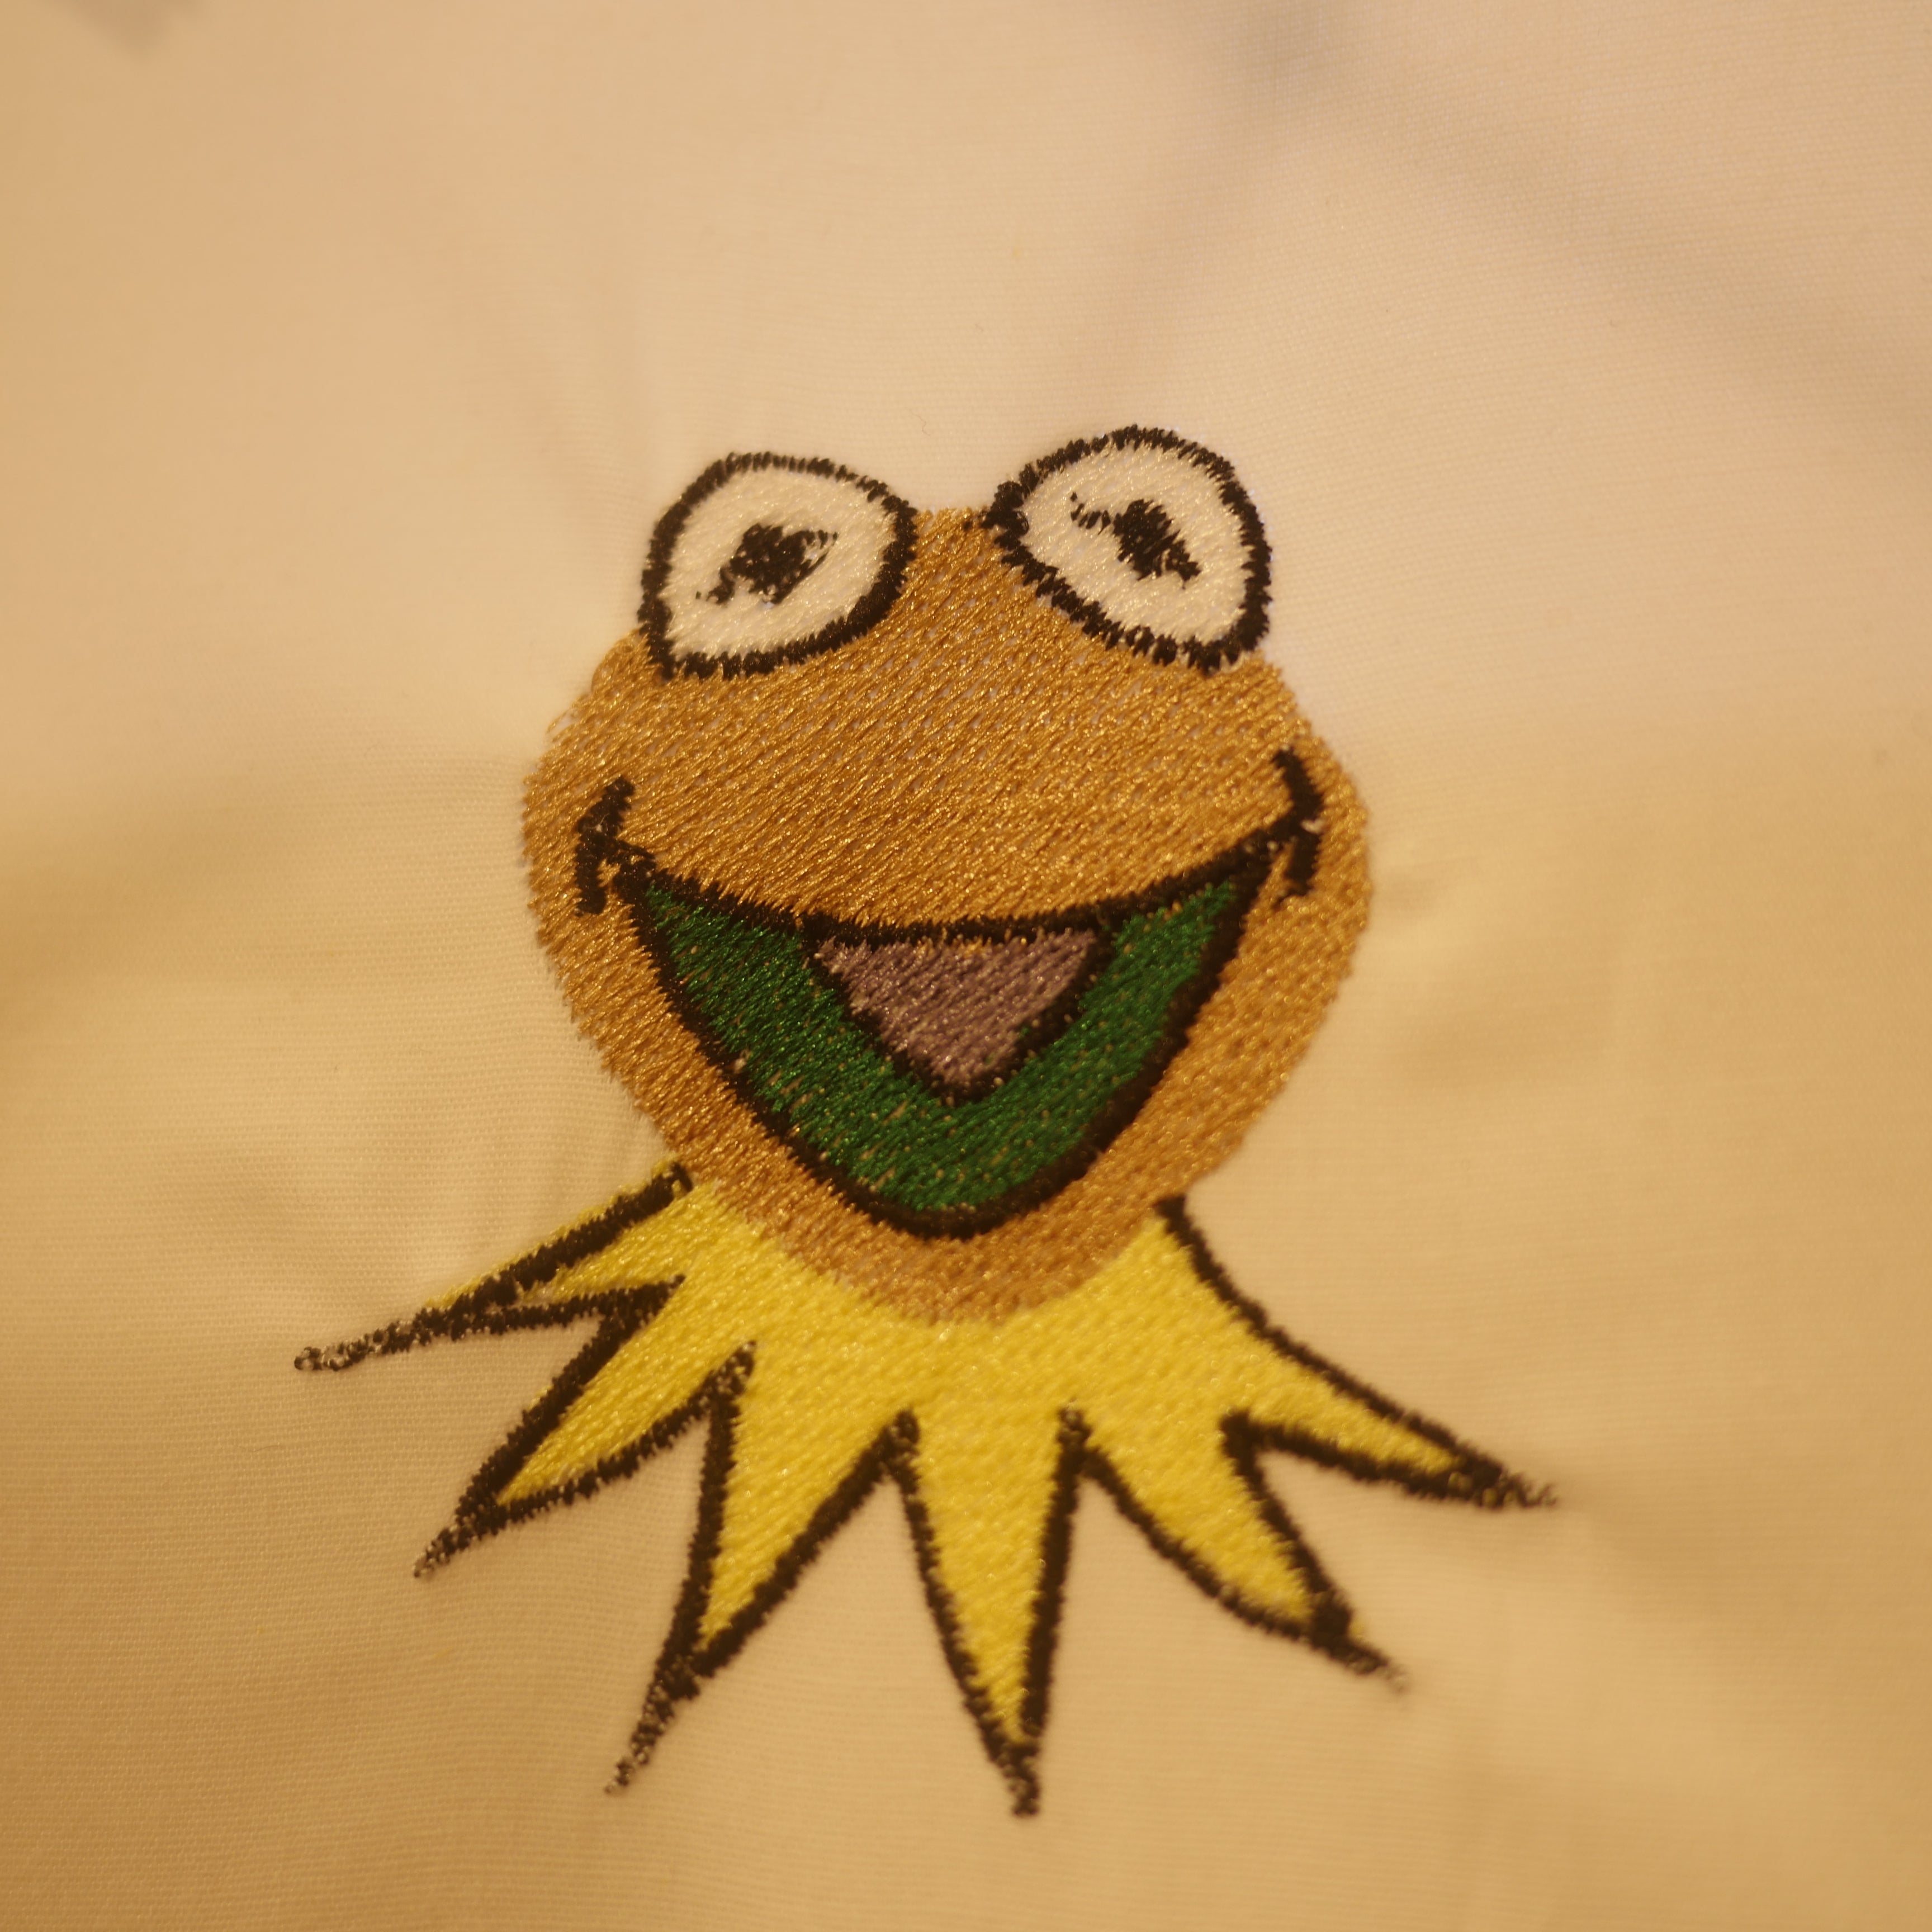 Kermit the Frog Embroidery Design